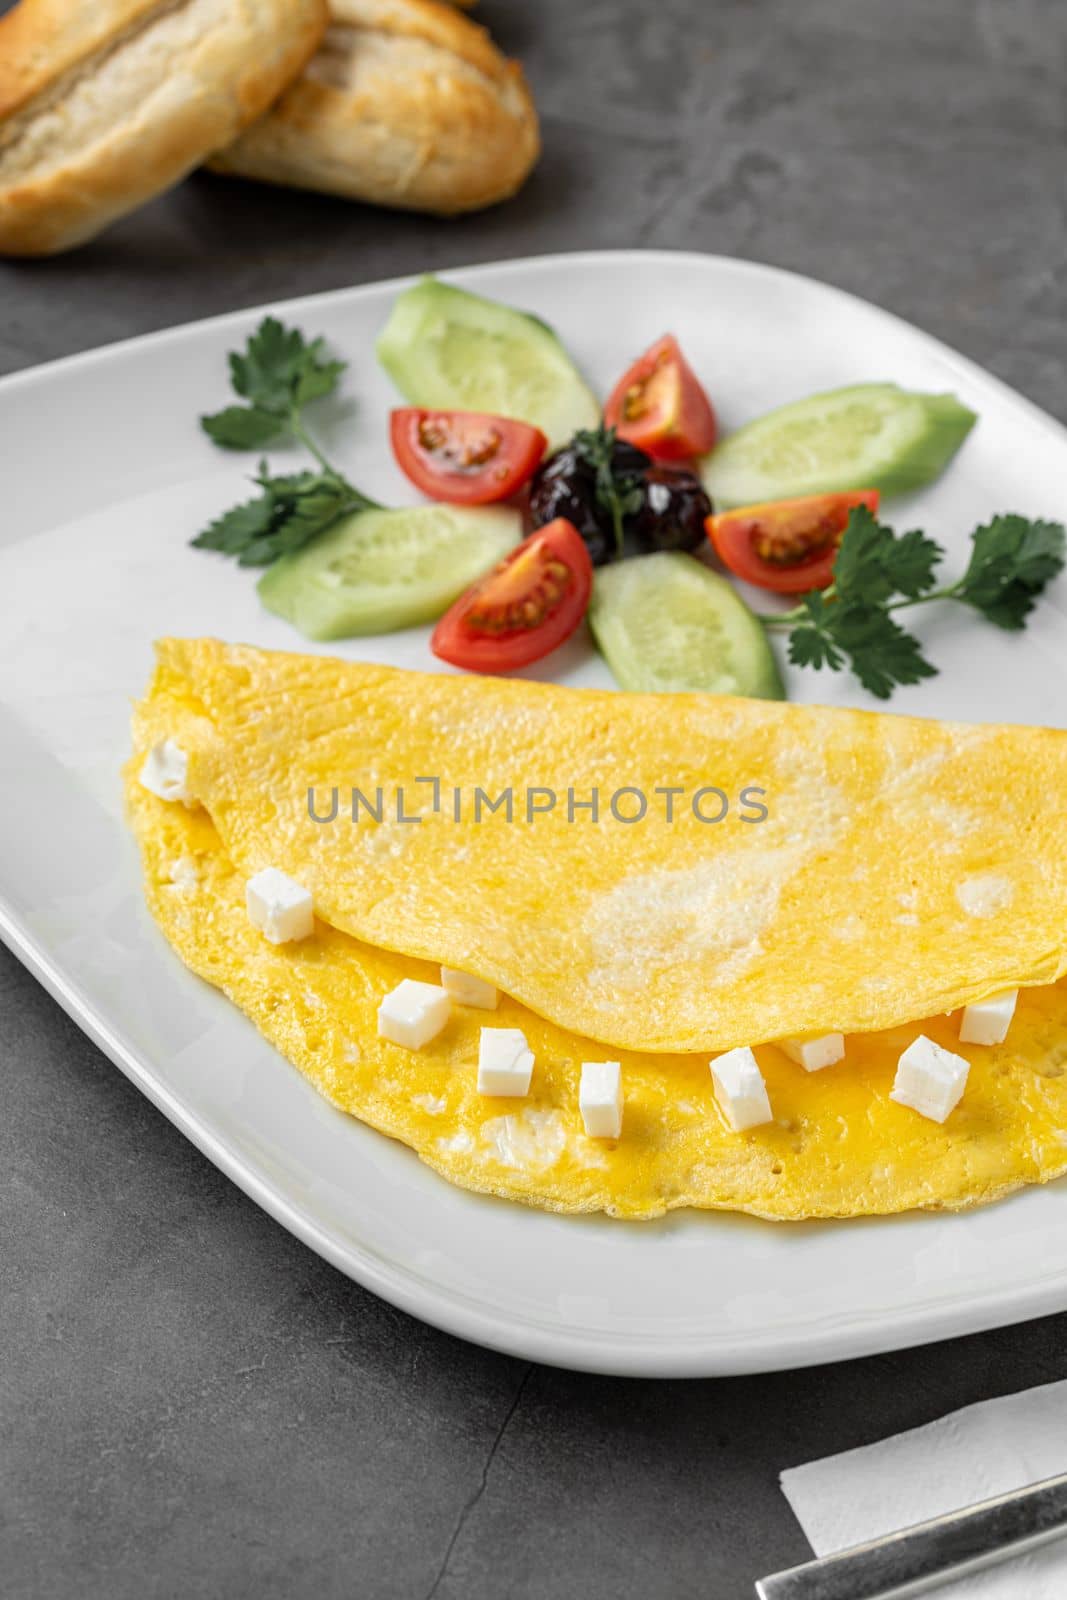 Feta cheese omelet with olives and tomatoes on a white porcelain plate